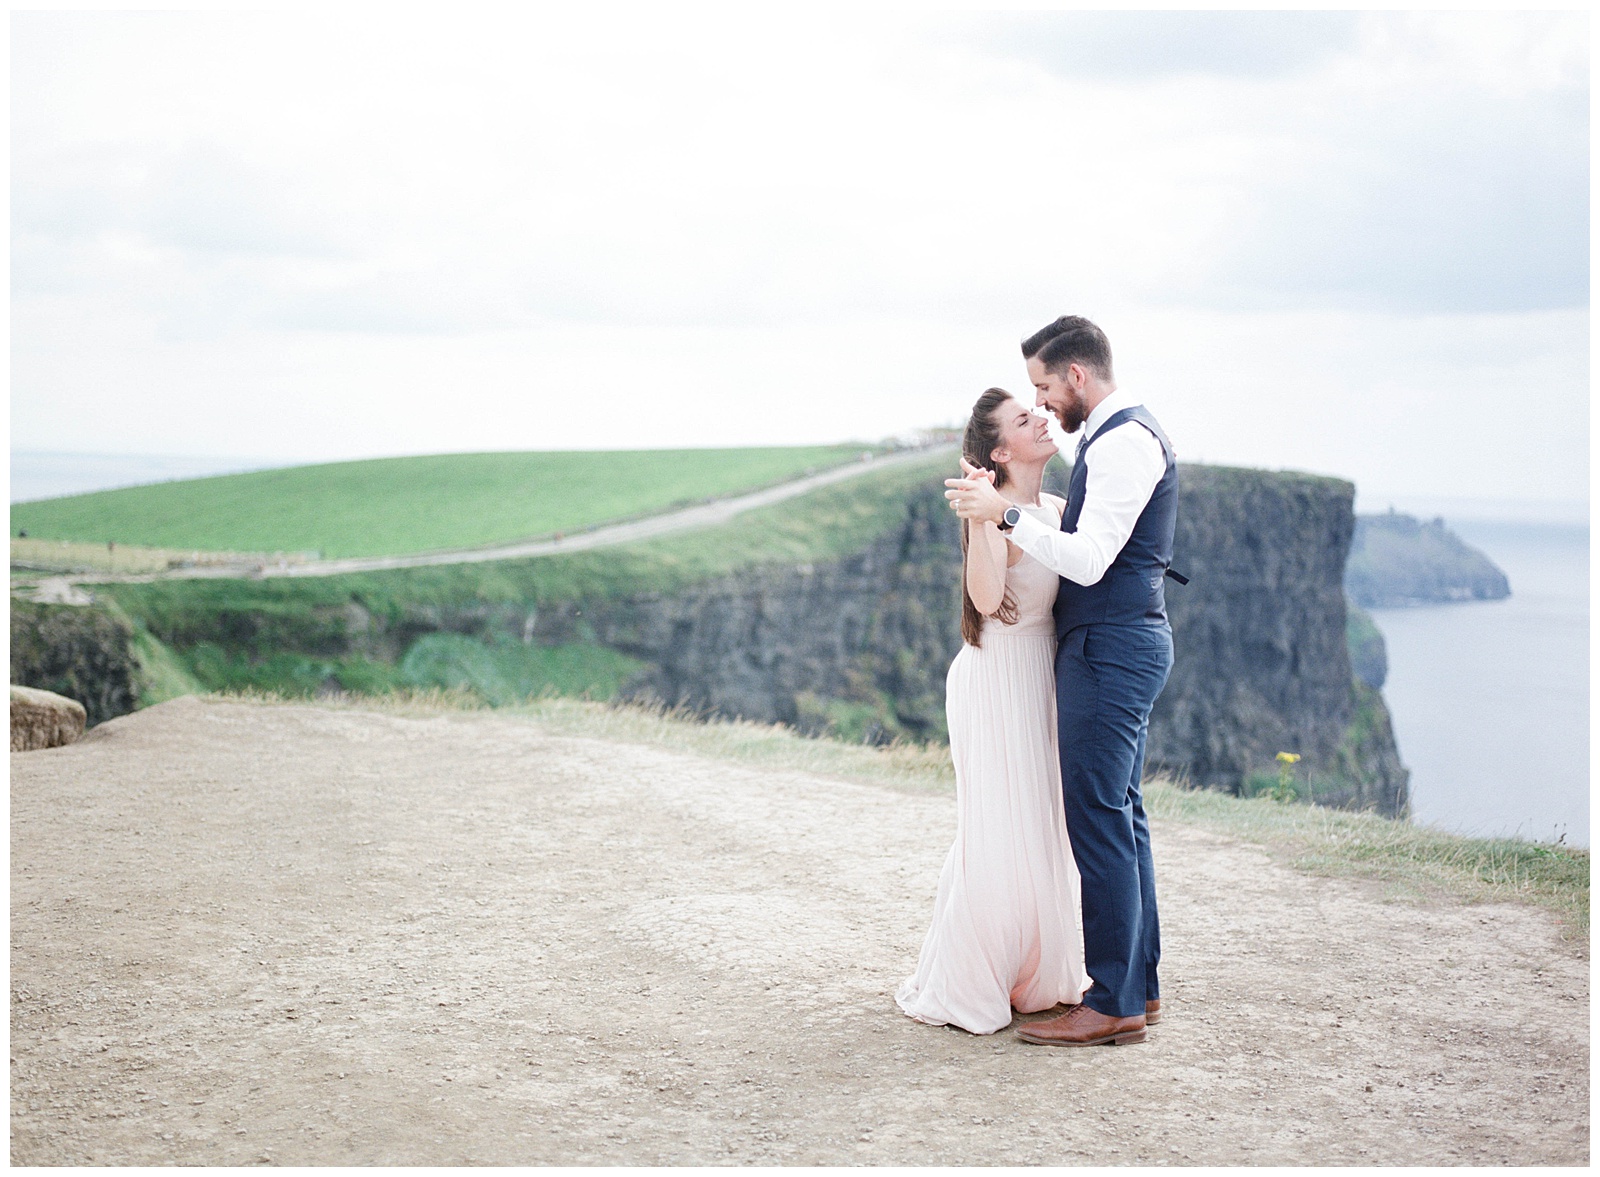 Luxury Destination Wedding Photographer Cliffs of Moher Anniversary Session on Film with Sarah Sunstrom Photography_0006.jpg